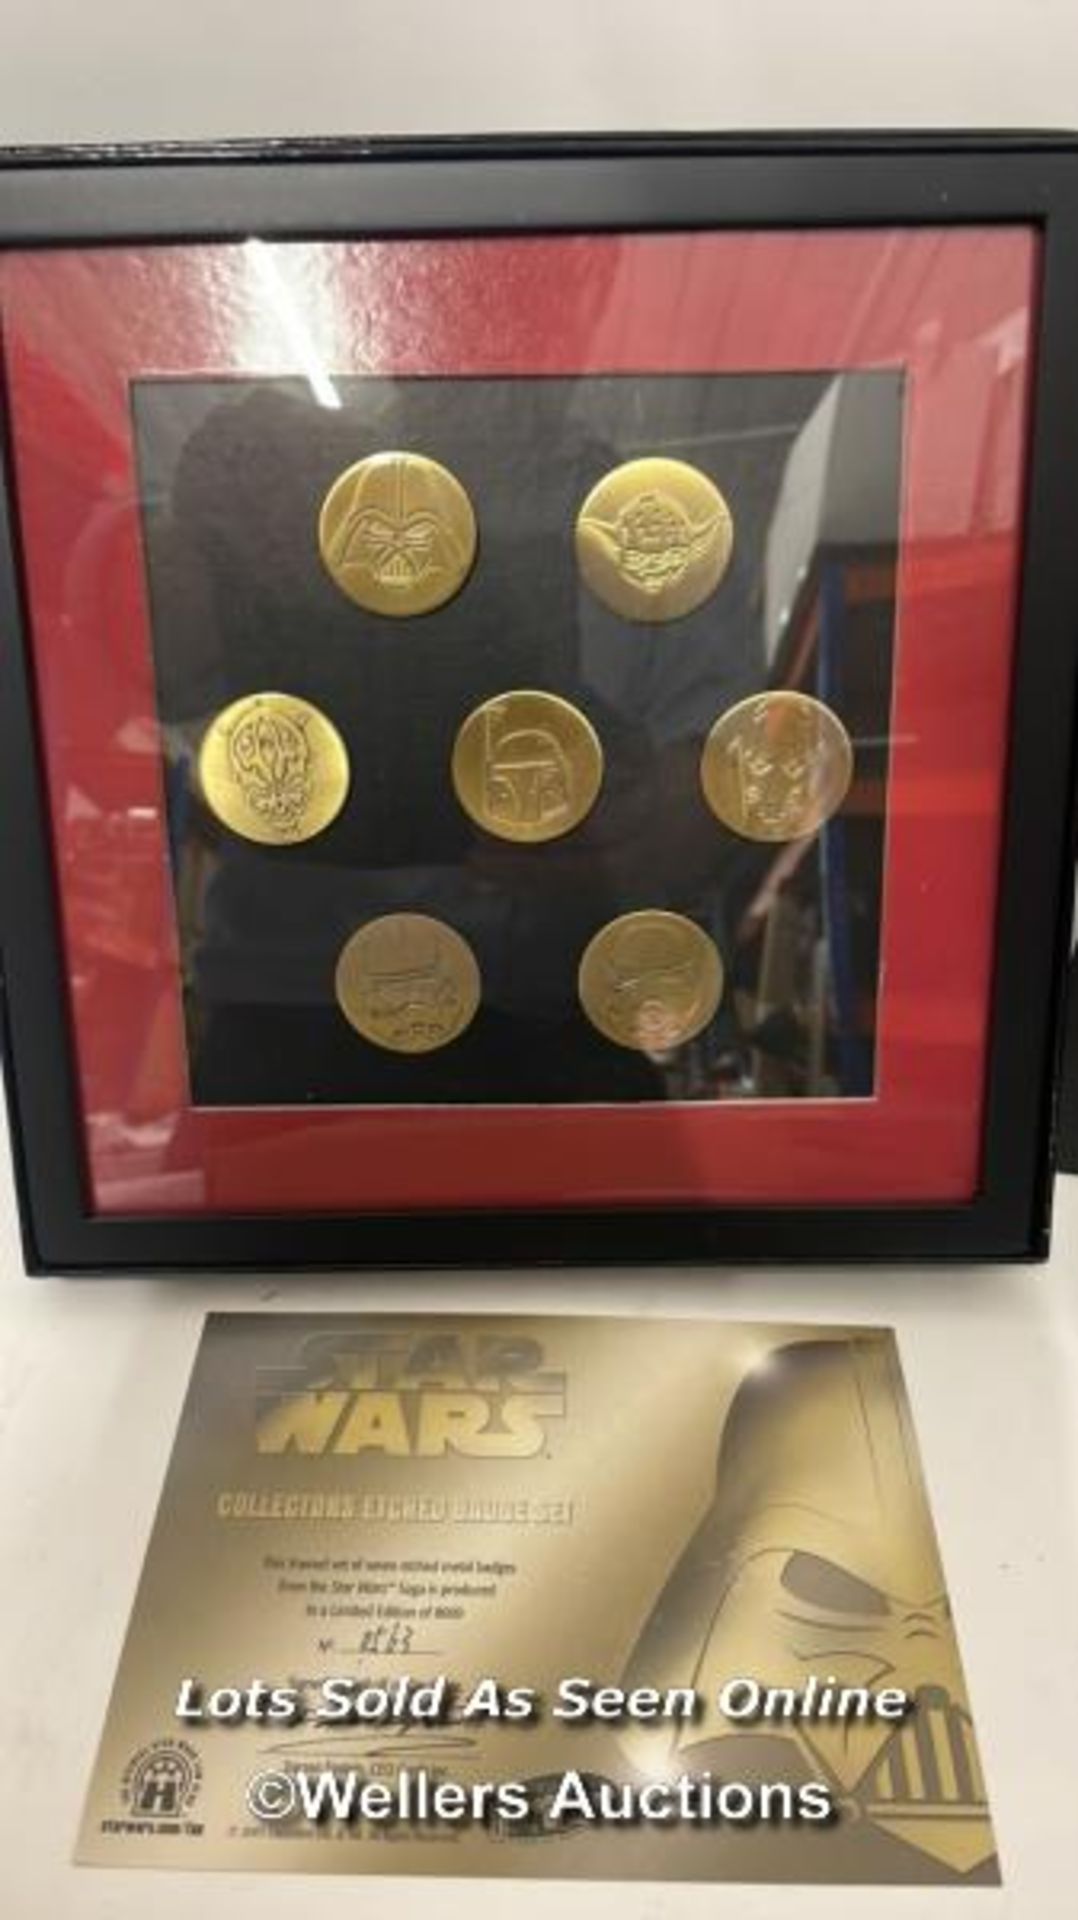 Star Wars saga lithographic print collection by Masterworks 2005 Limited edition 5163 / 8000, - Image 4 of 7